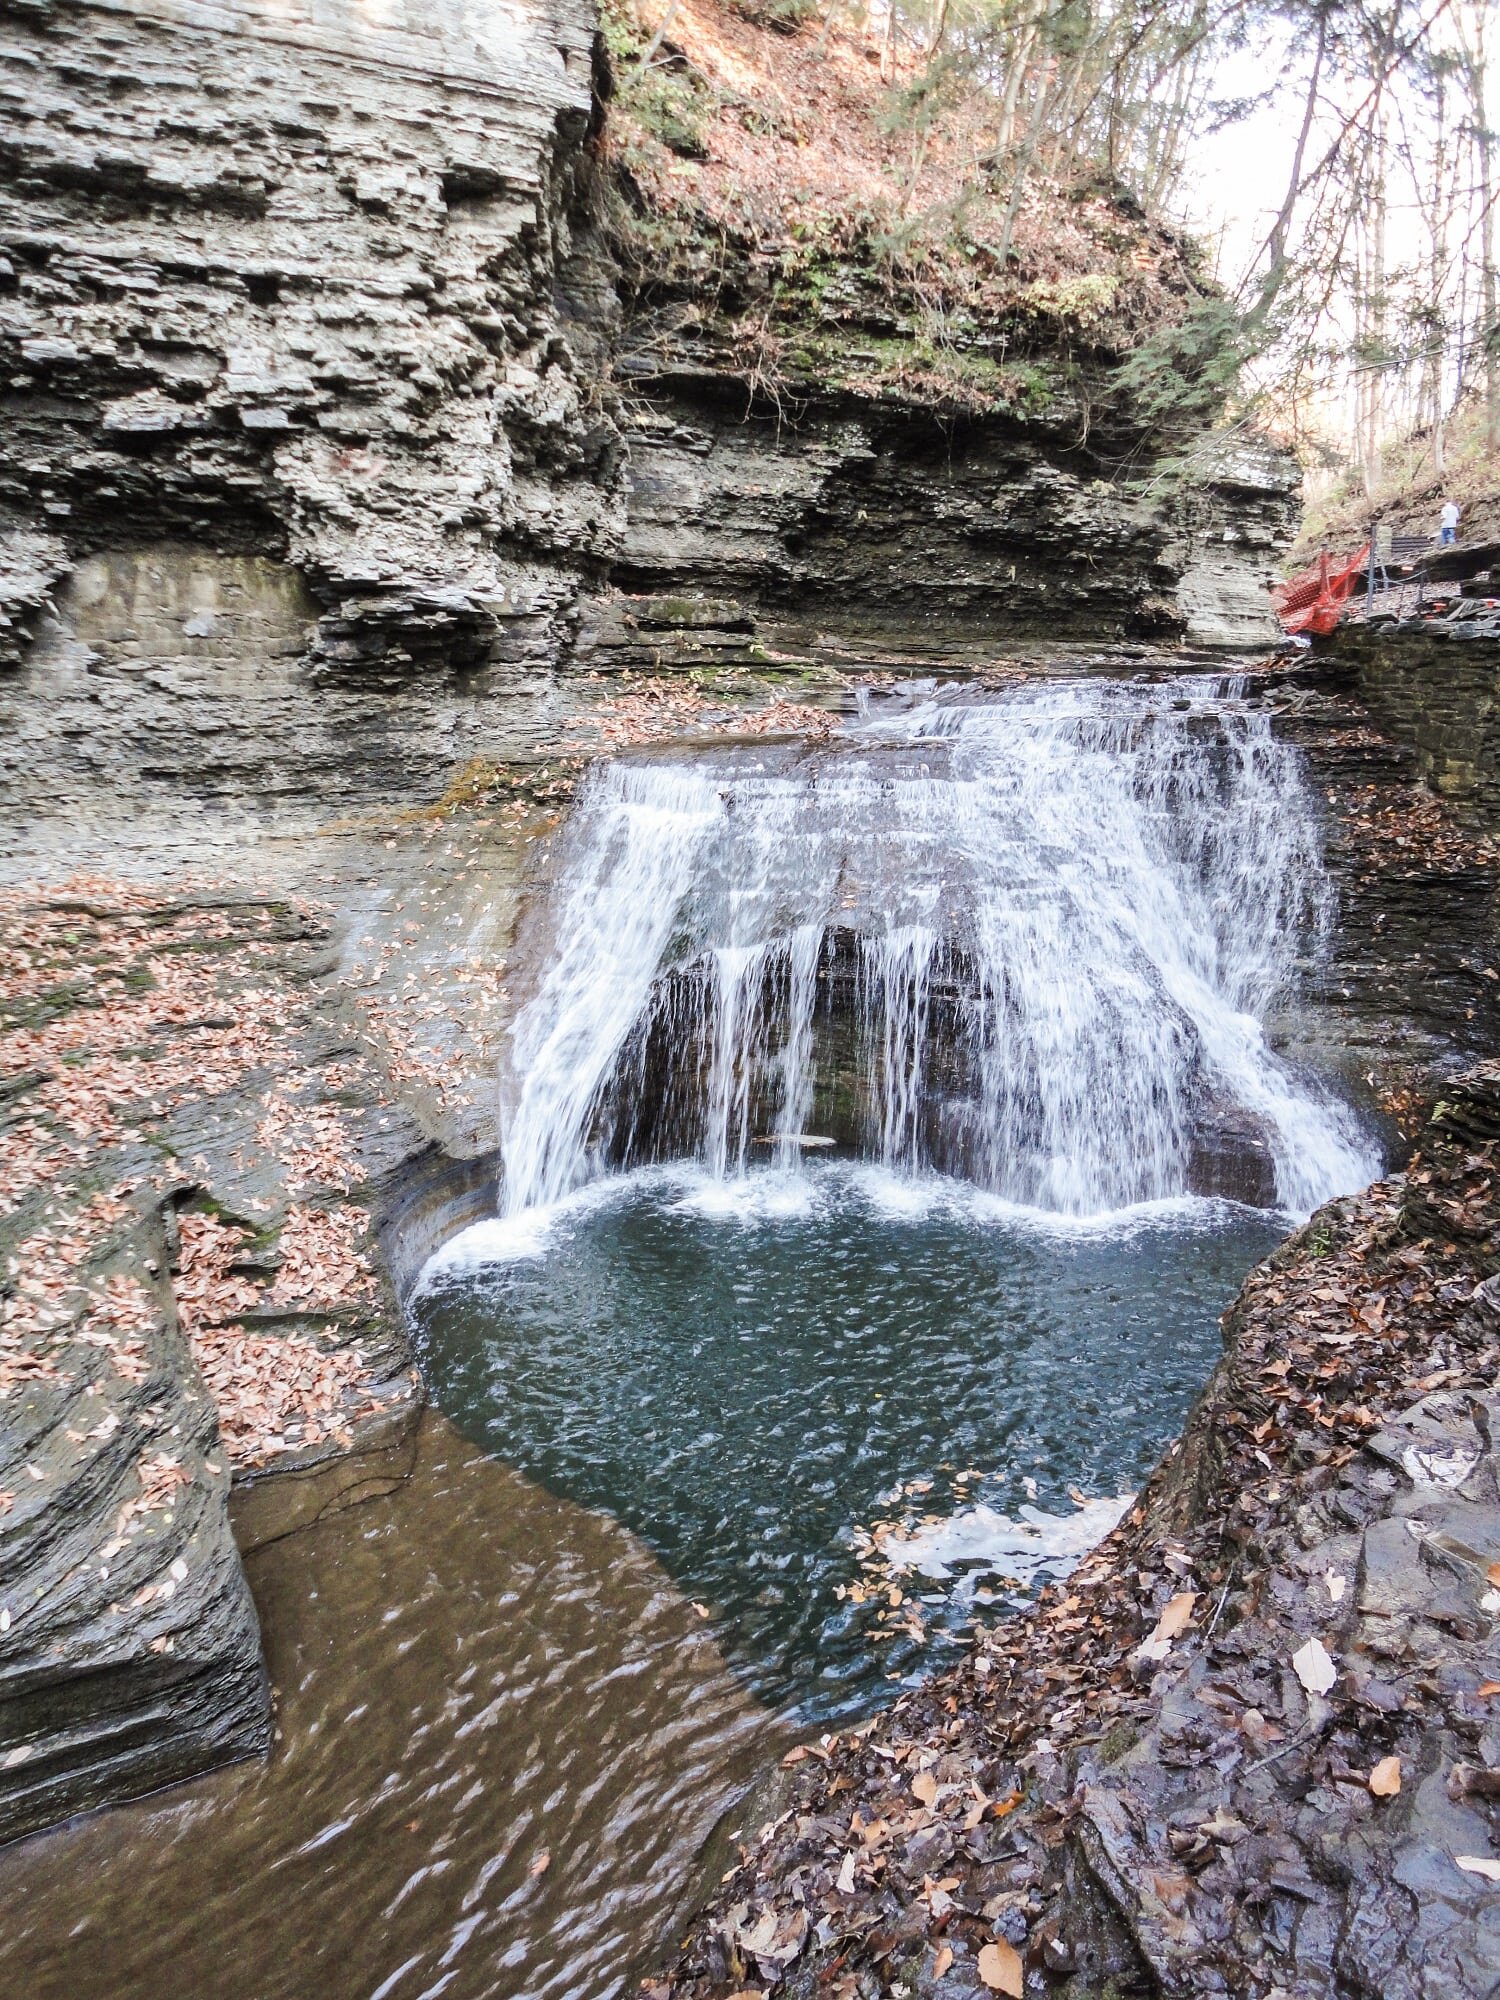  Buttermilk Falls State Park, Upstate New York fall travel ideas | Blooming Magnolias Blog | Travel.  